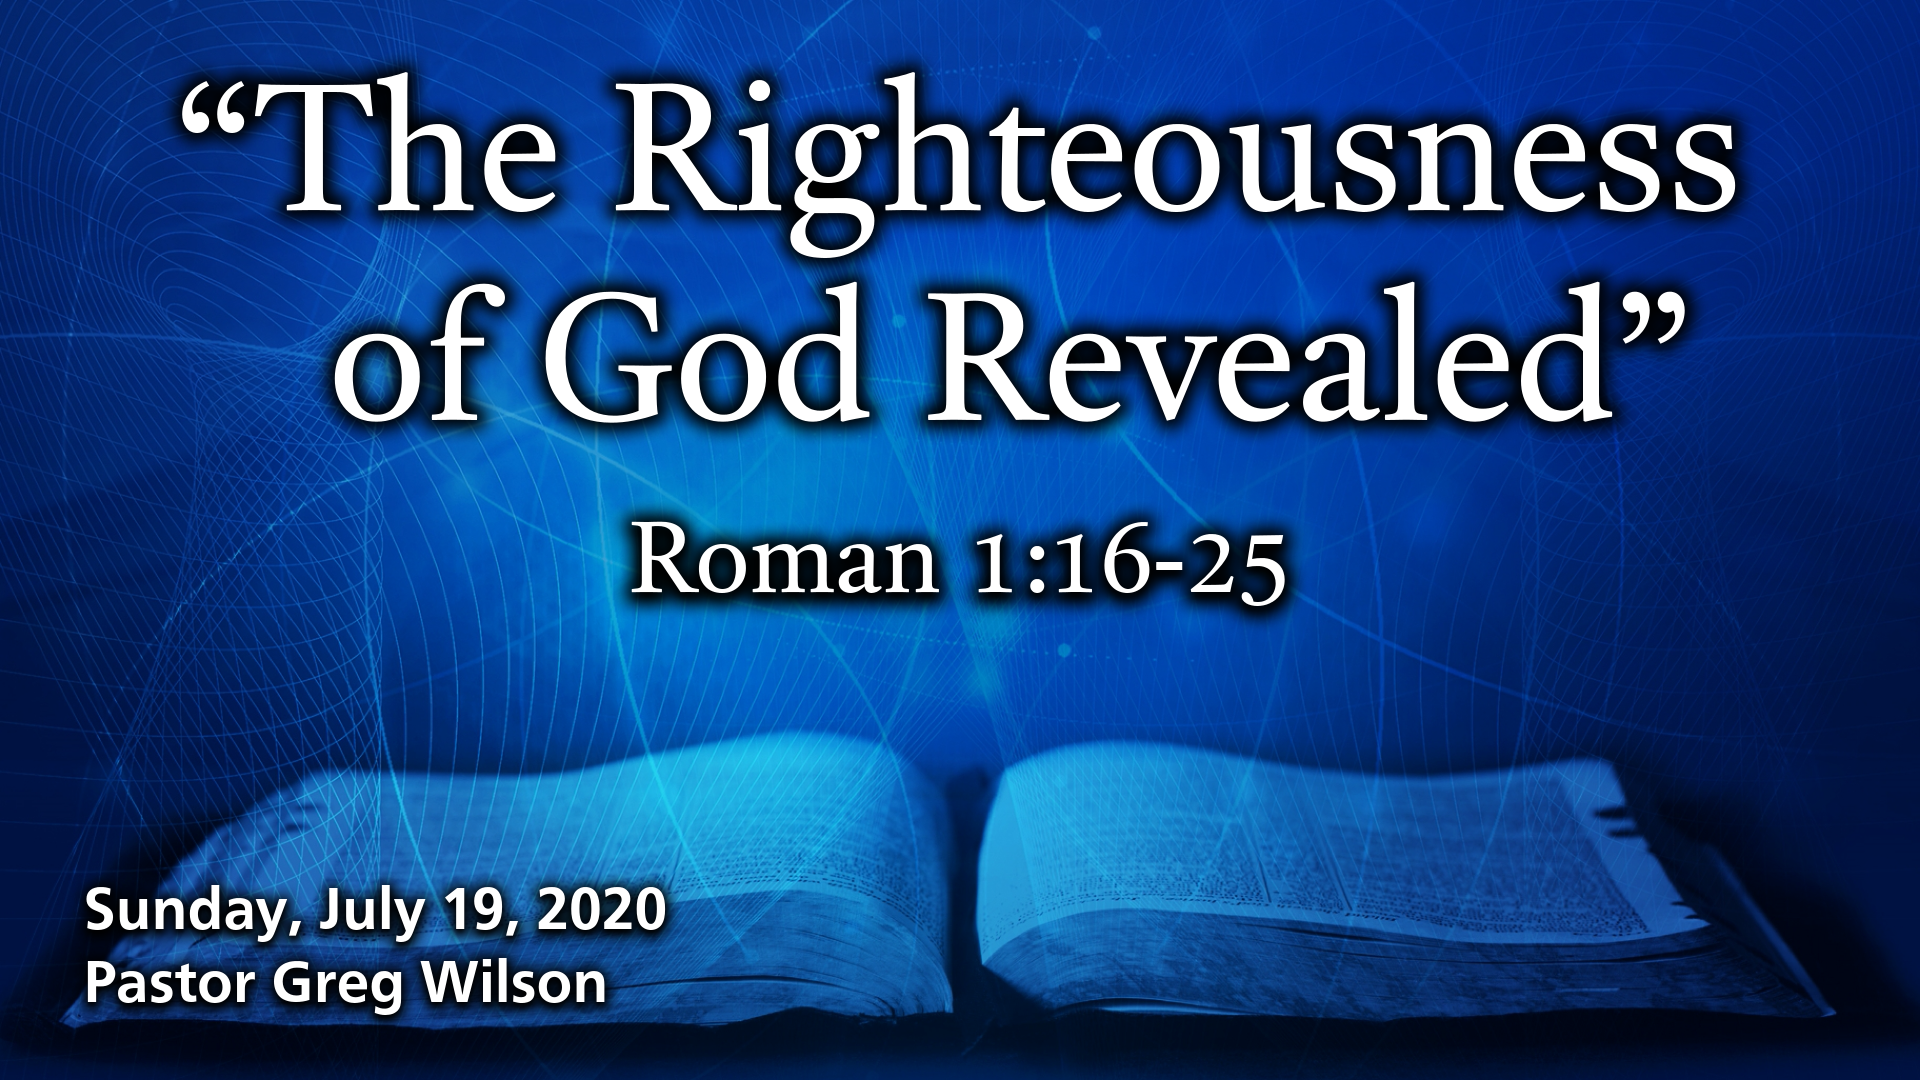 “The Righteousness of God Revealed”